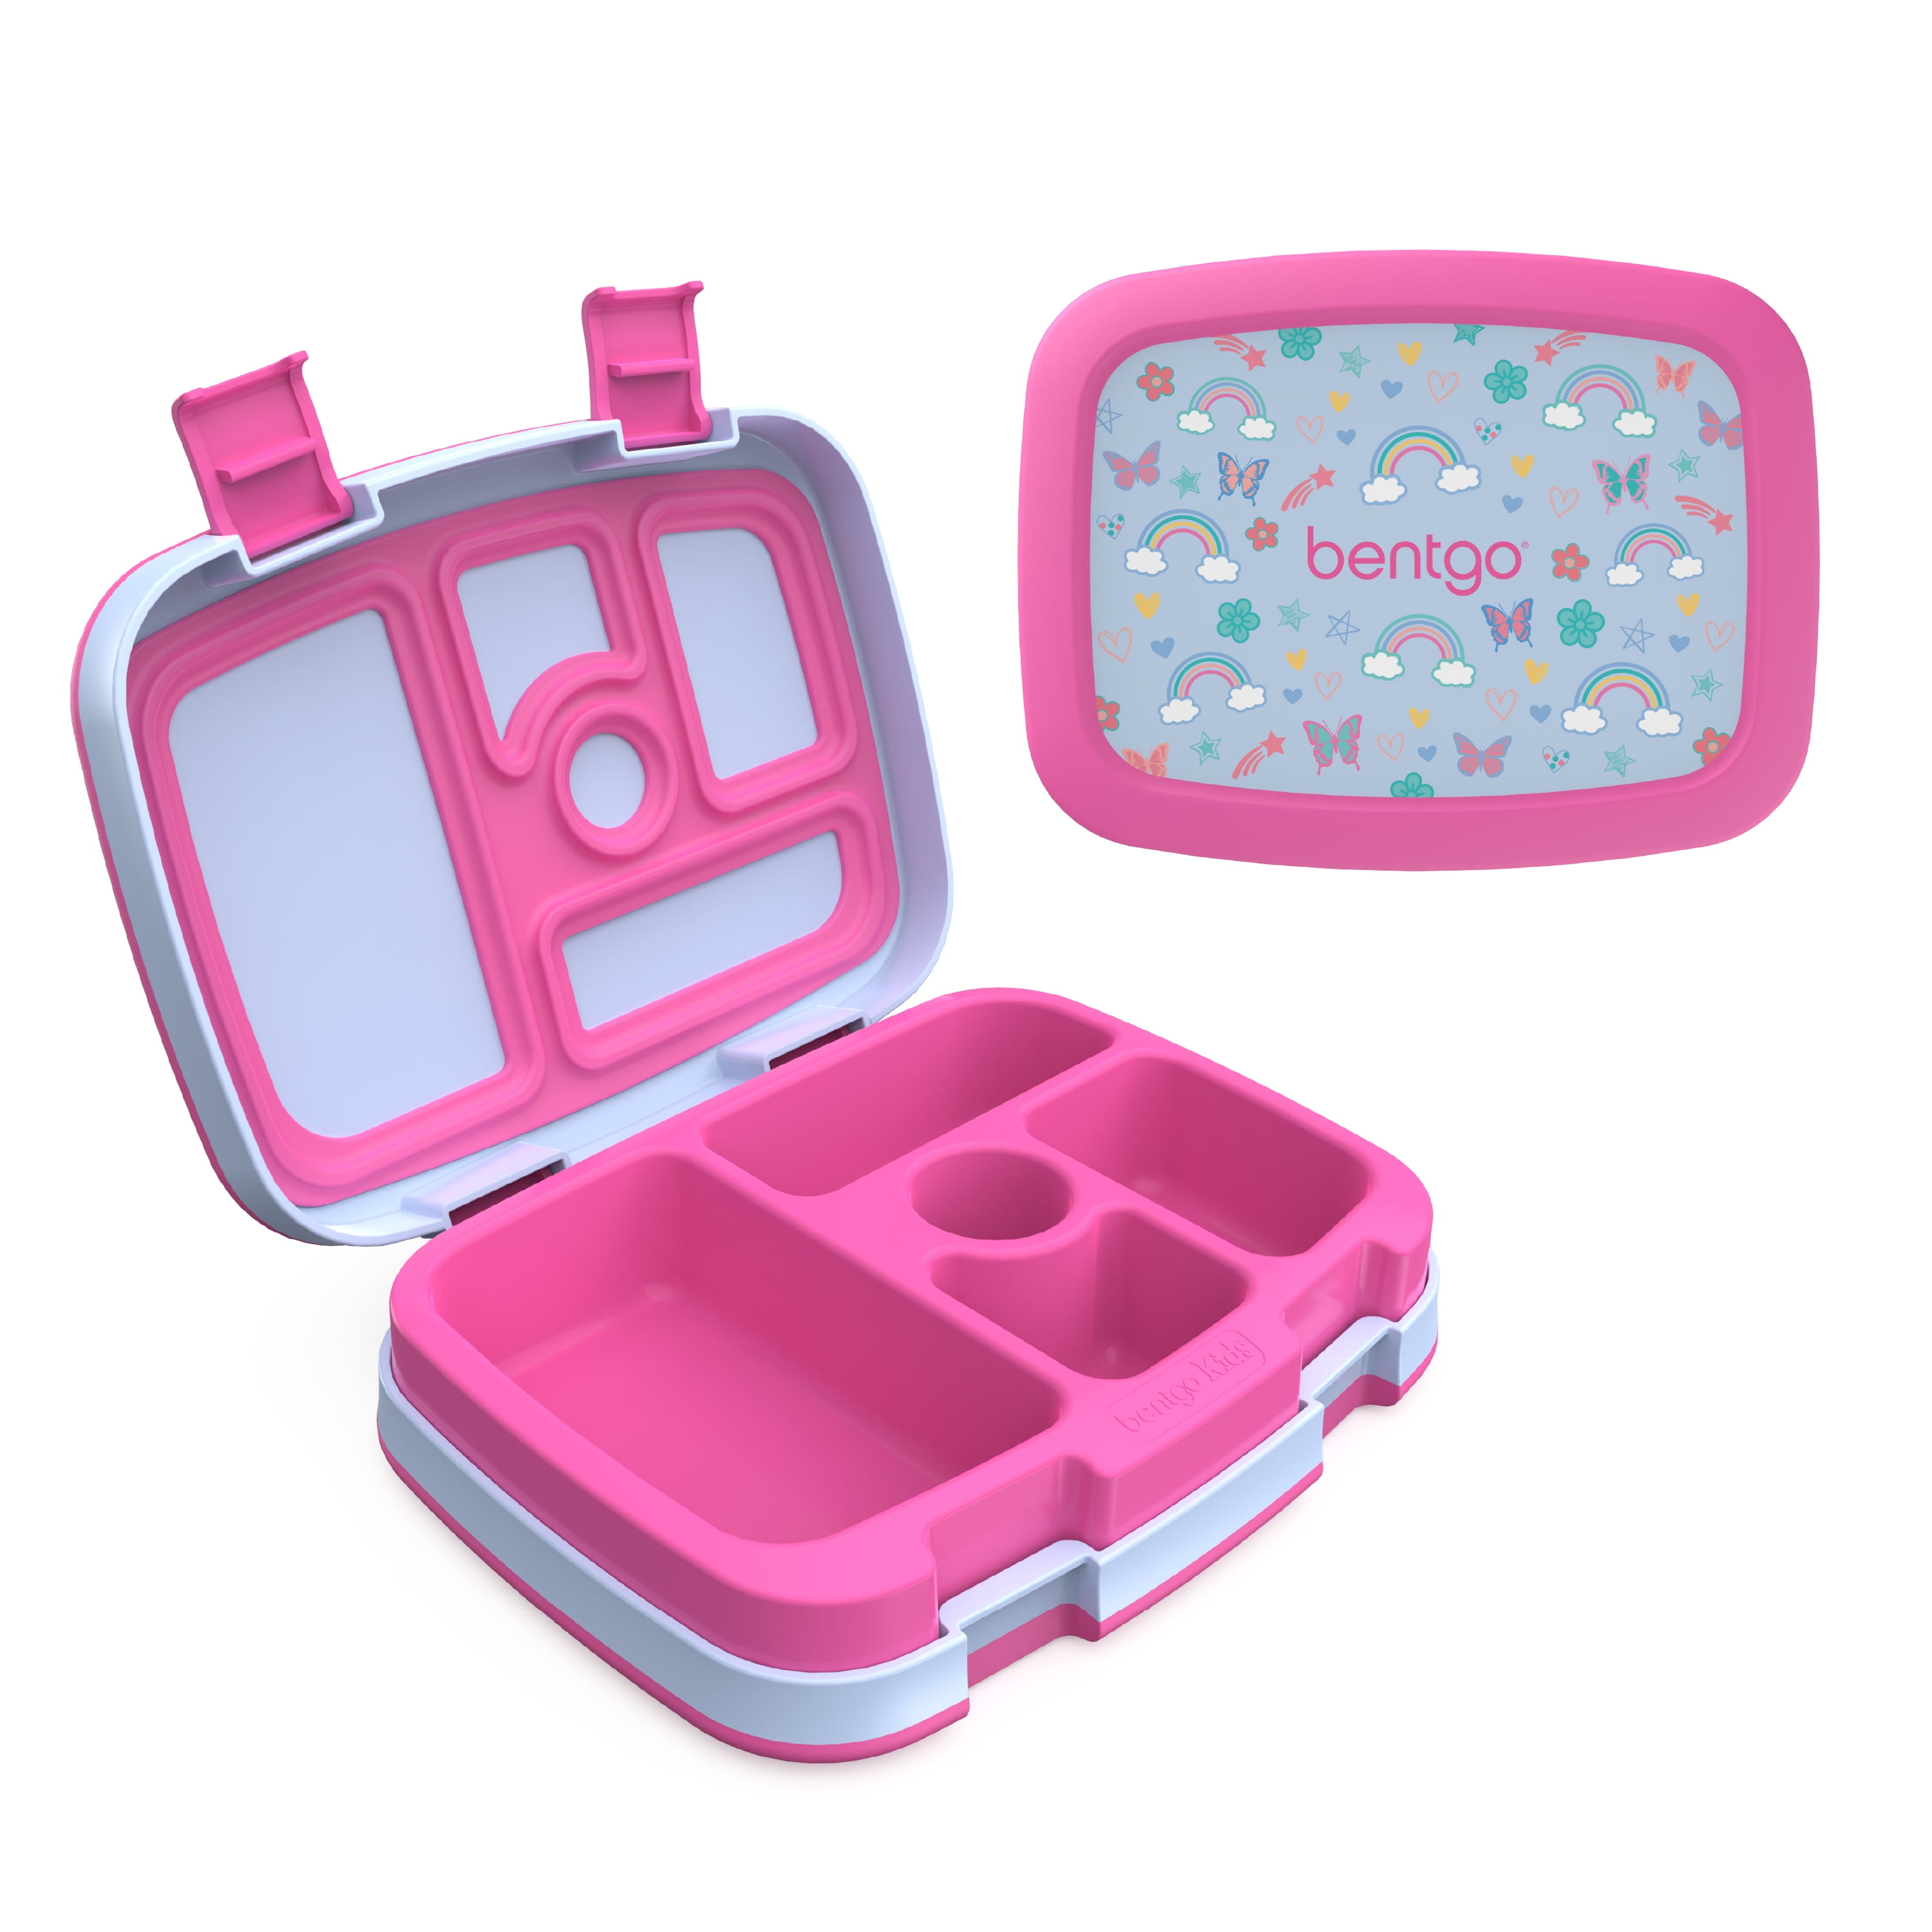  Bentgo® Kids 5-Compartment Lunch Box - Glitter Design for  School, Ideal for Ages 3-7, Leak-Proof, Drop-Proof, Dishwasher Safe, & Made  with BPA-Free Materials (Glitter Edition - Silver) : Home & Kitchen